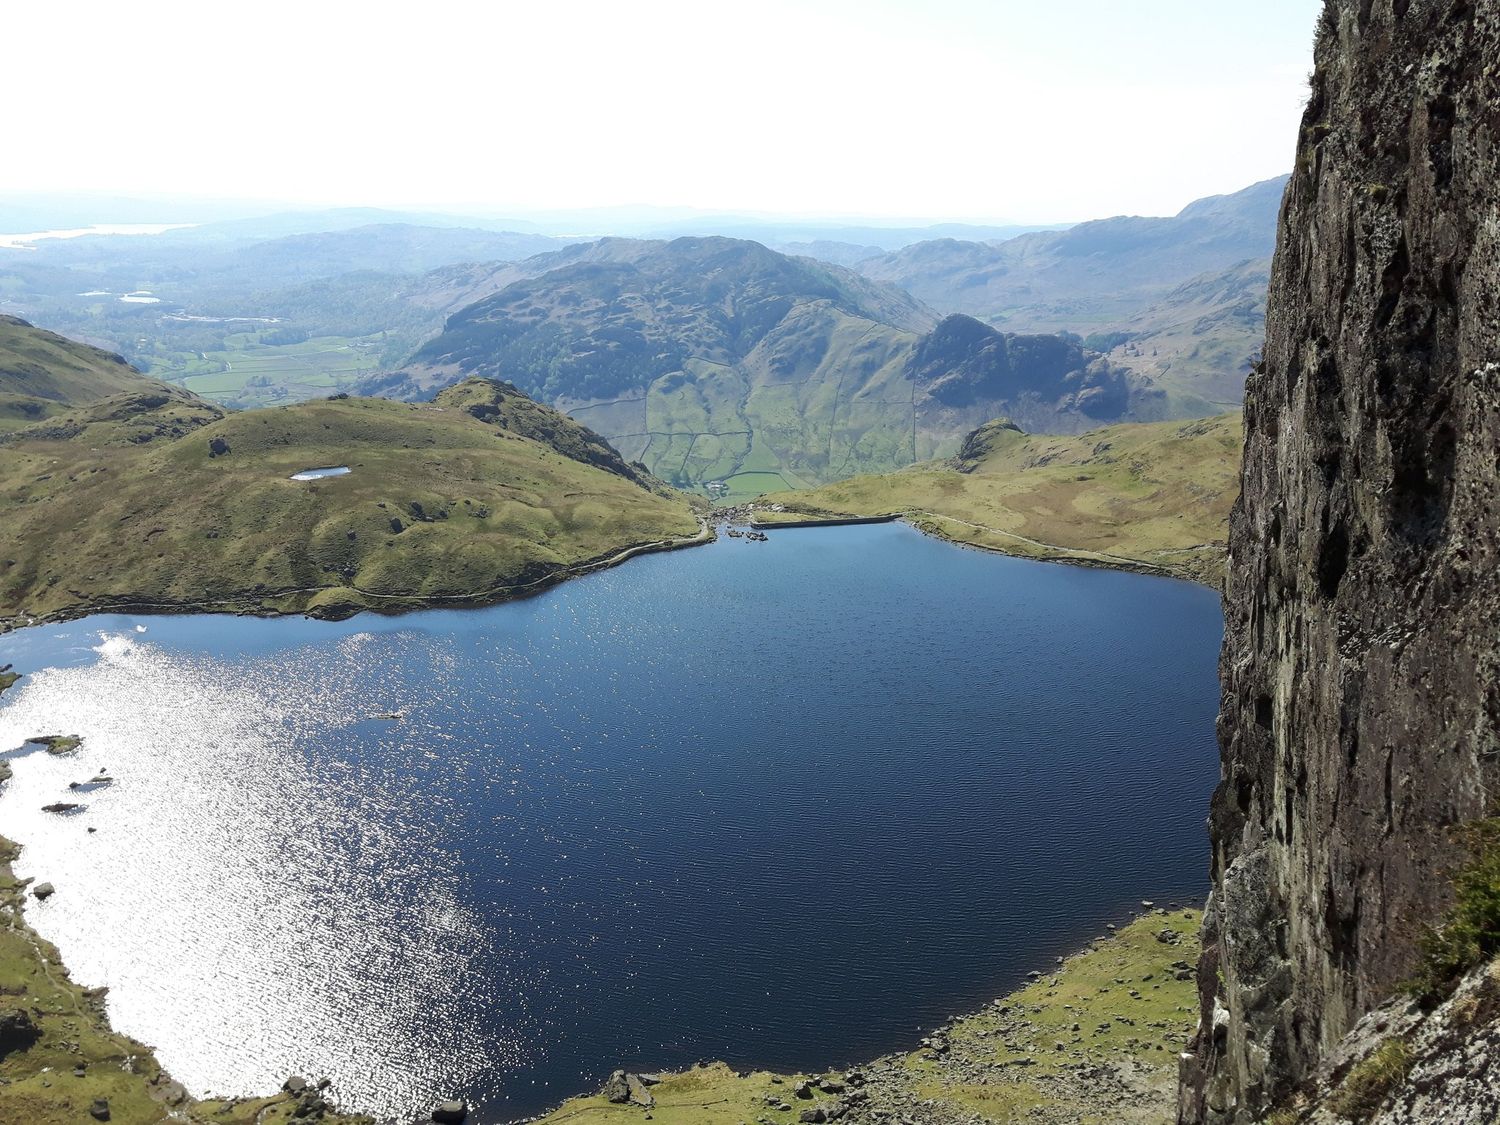  Looking down at Stickle Tarn from Pavey Ark, Langdale - Chris Ensoll Mountain Guide 